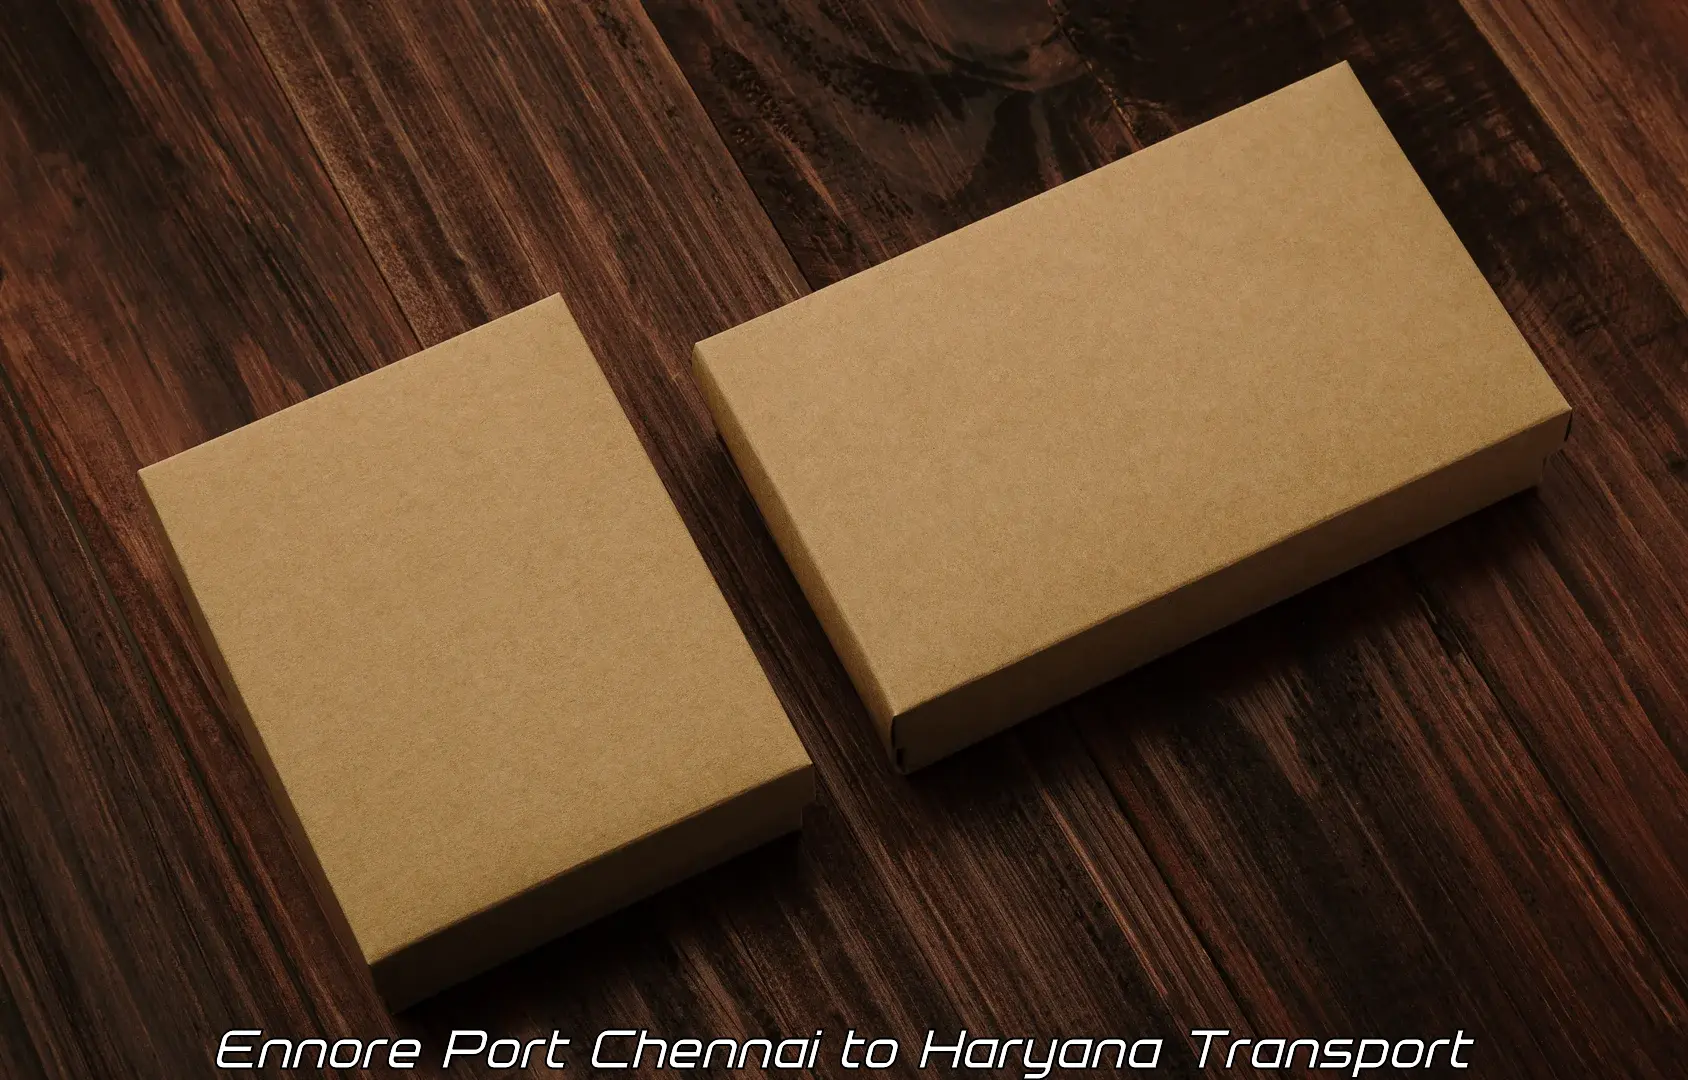 Delivery service Ennore Port Chennai to Sohna